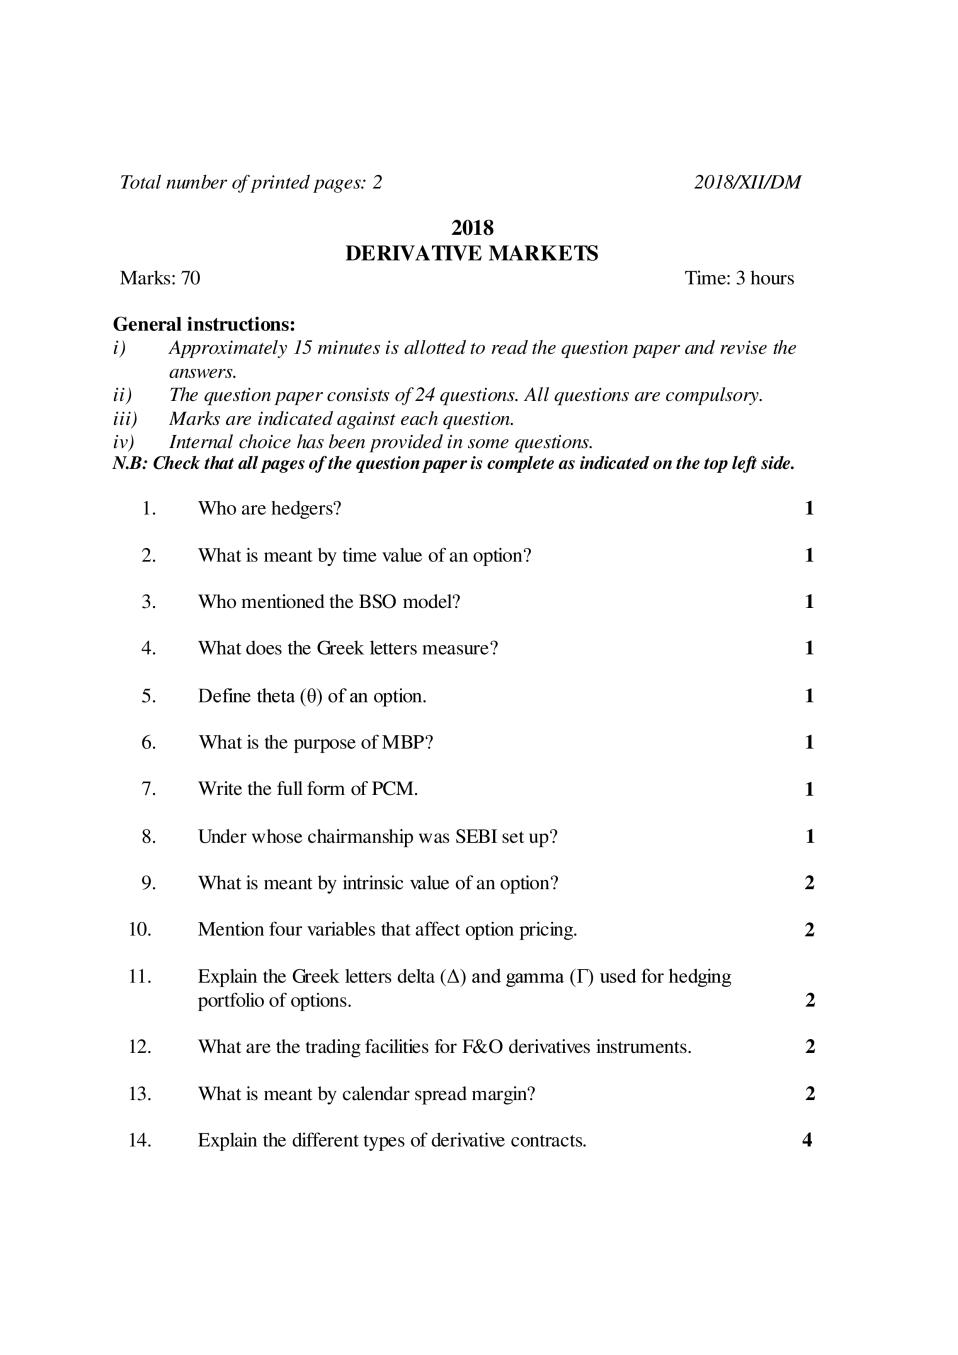 NBSE Class 12 Question Paper 2018 for Derivative Markets - Page 1